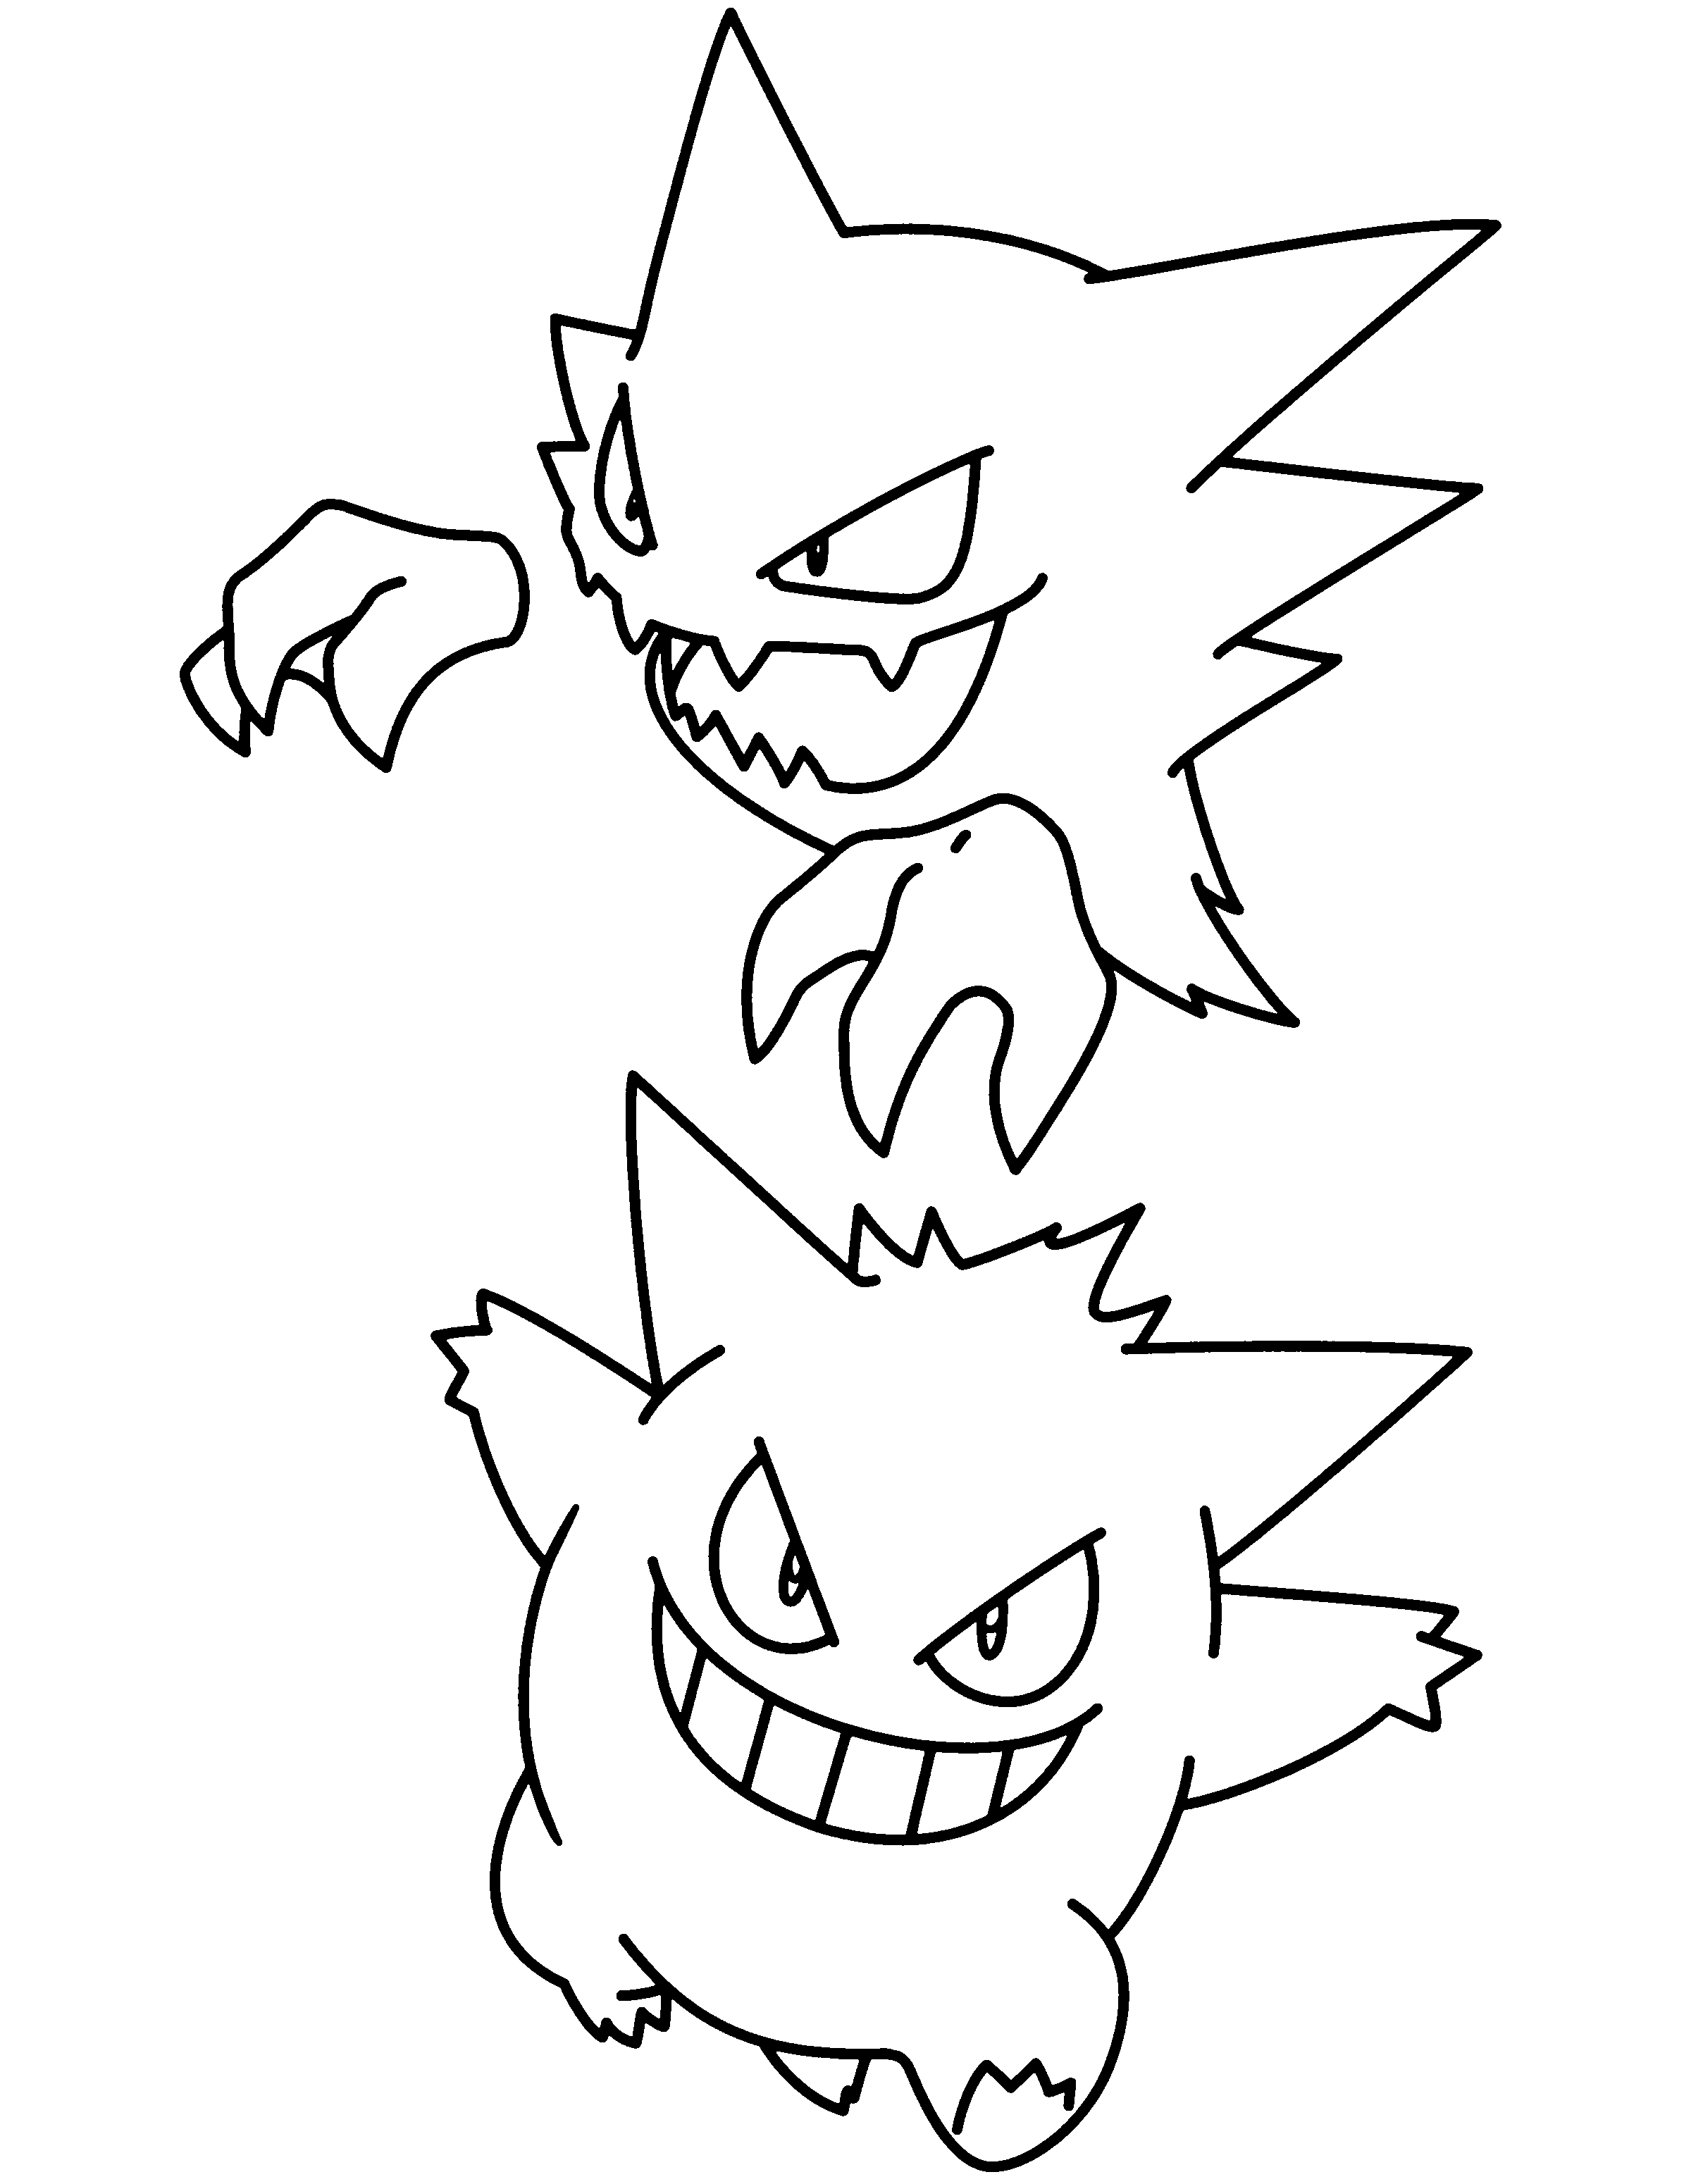 Haunter and Gengar | Pokemon coloring pages, Pokemon coloring ...